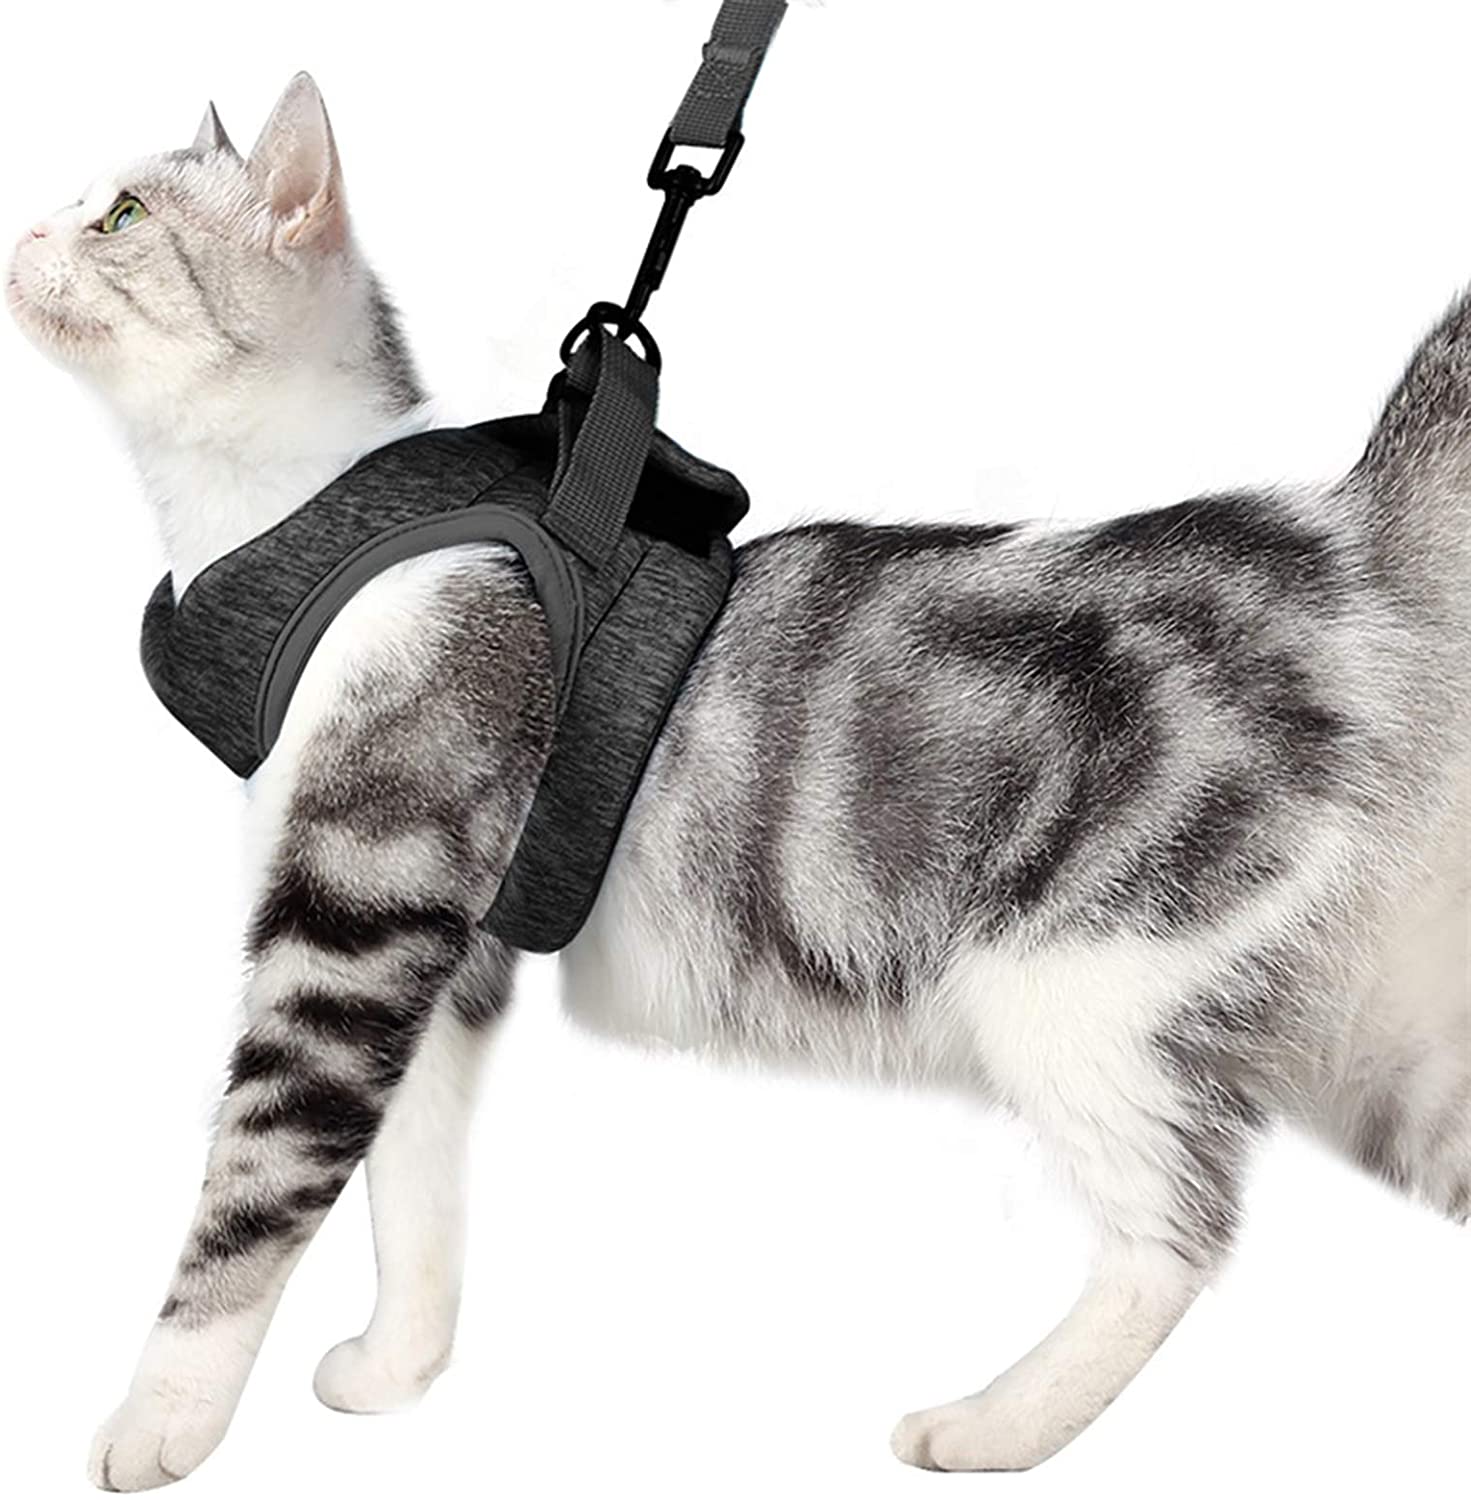 Cat / Dog Harness and Leash Set for Walking 360° wrap-Around - e4cents